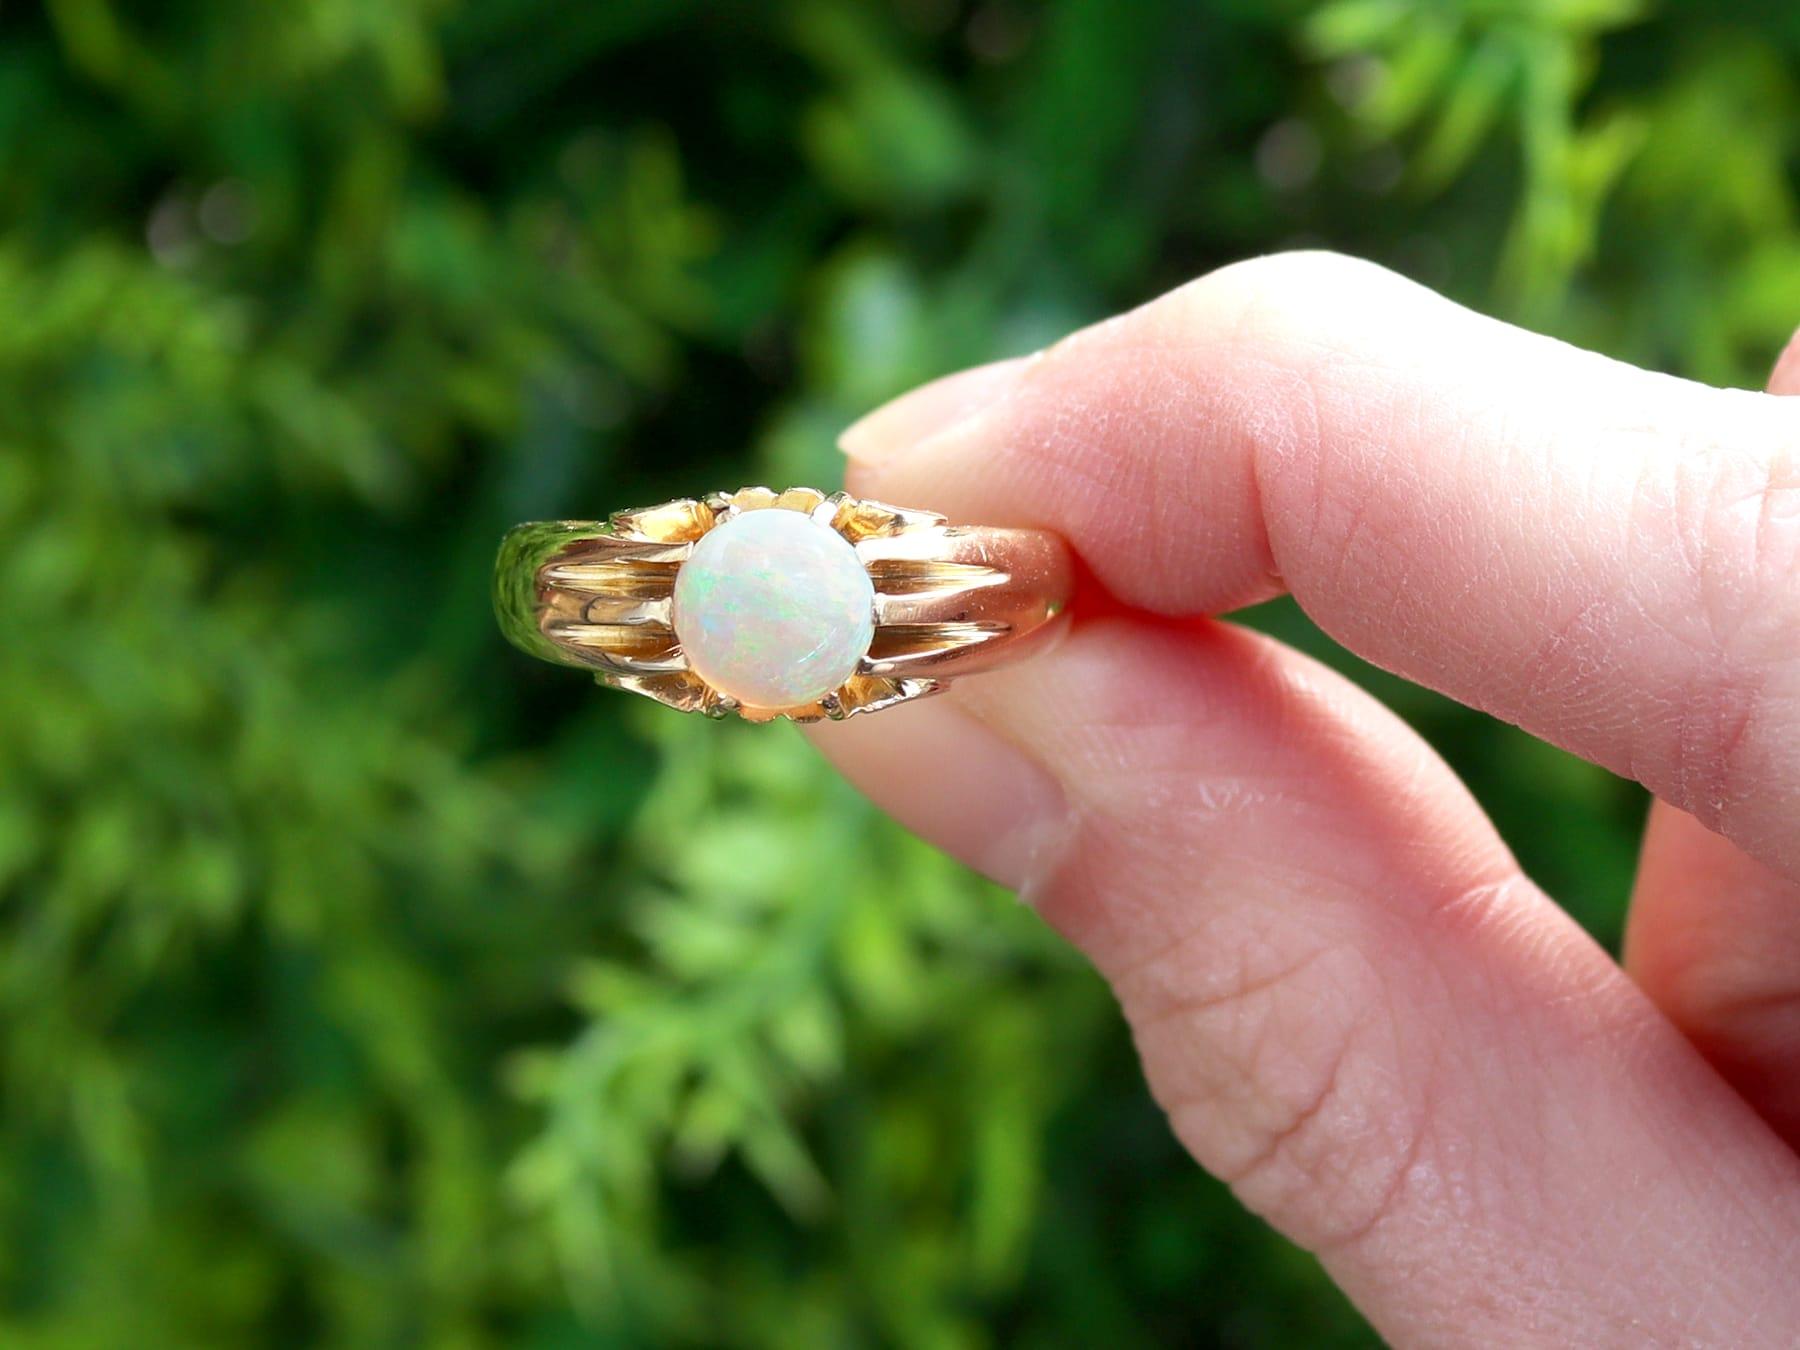 A fine and impressive vintage 1960s 0.68 carat opal and 18 karat yellow gold ring; part of our diverse collection of vintage gents jewelry collection.

This fine and impressive vintage opal ring has been crafted in 18k yellow gold, in the antique